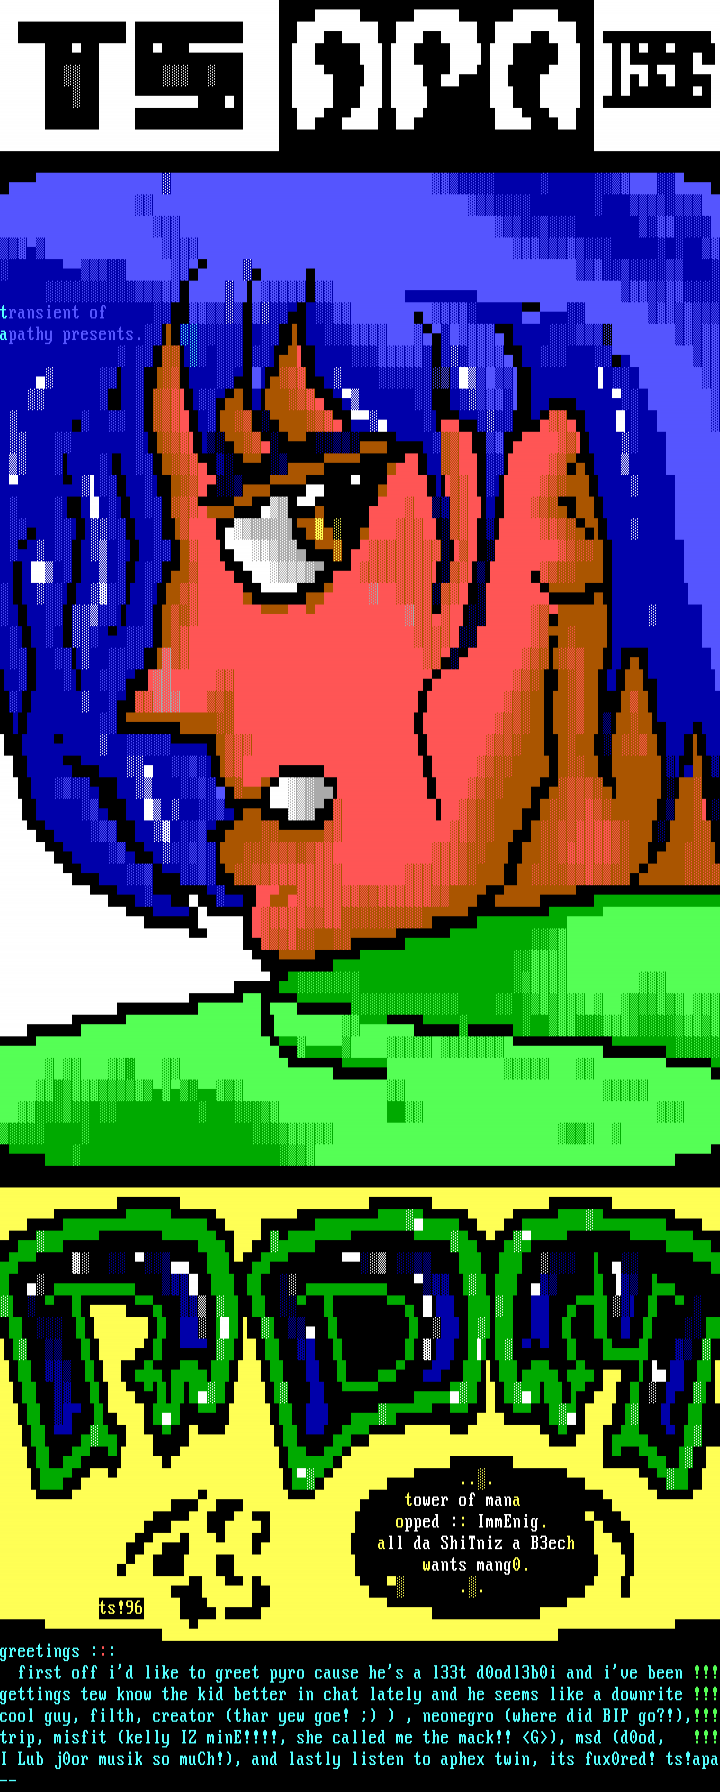 tower of mana - ansi 3 by transient